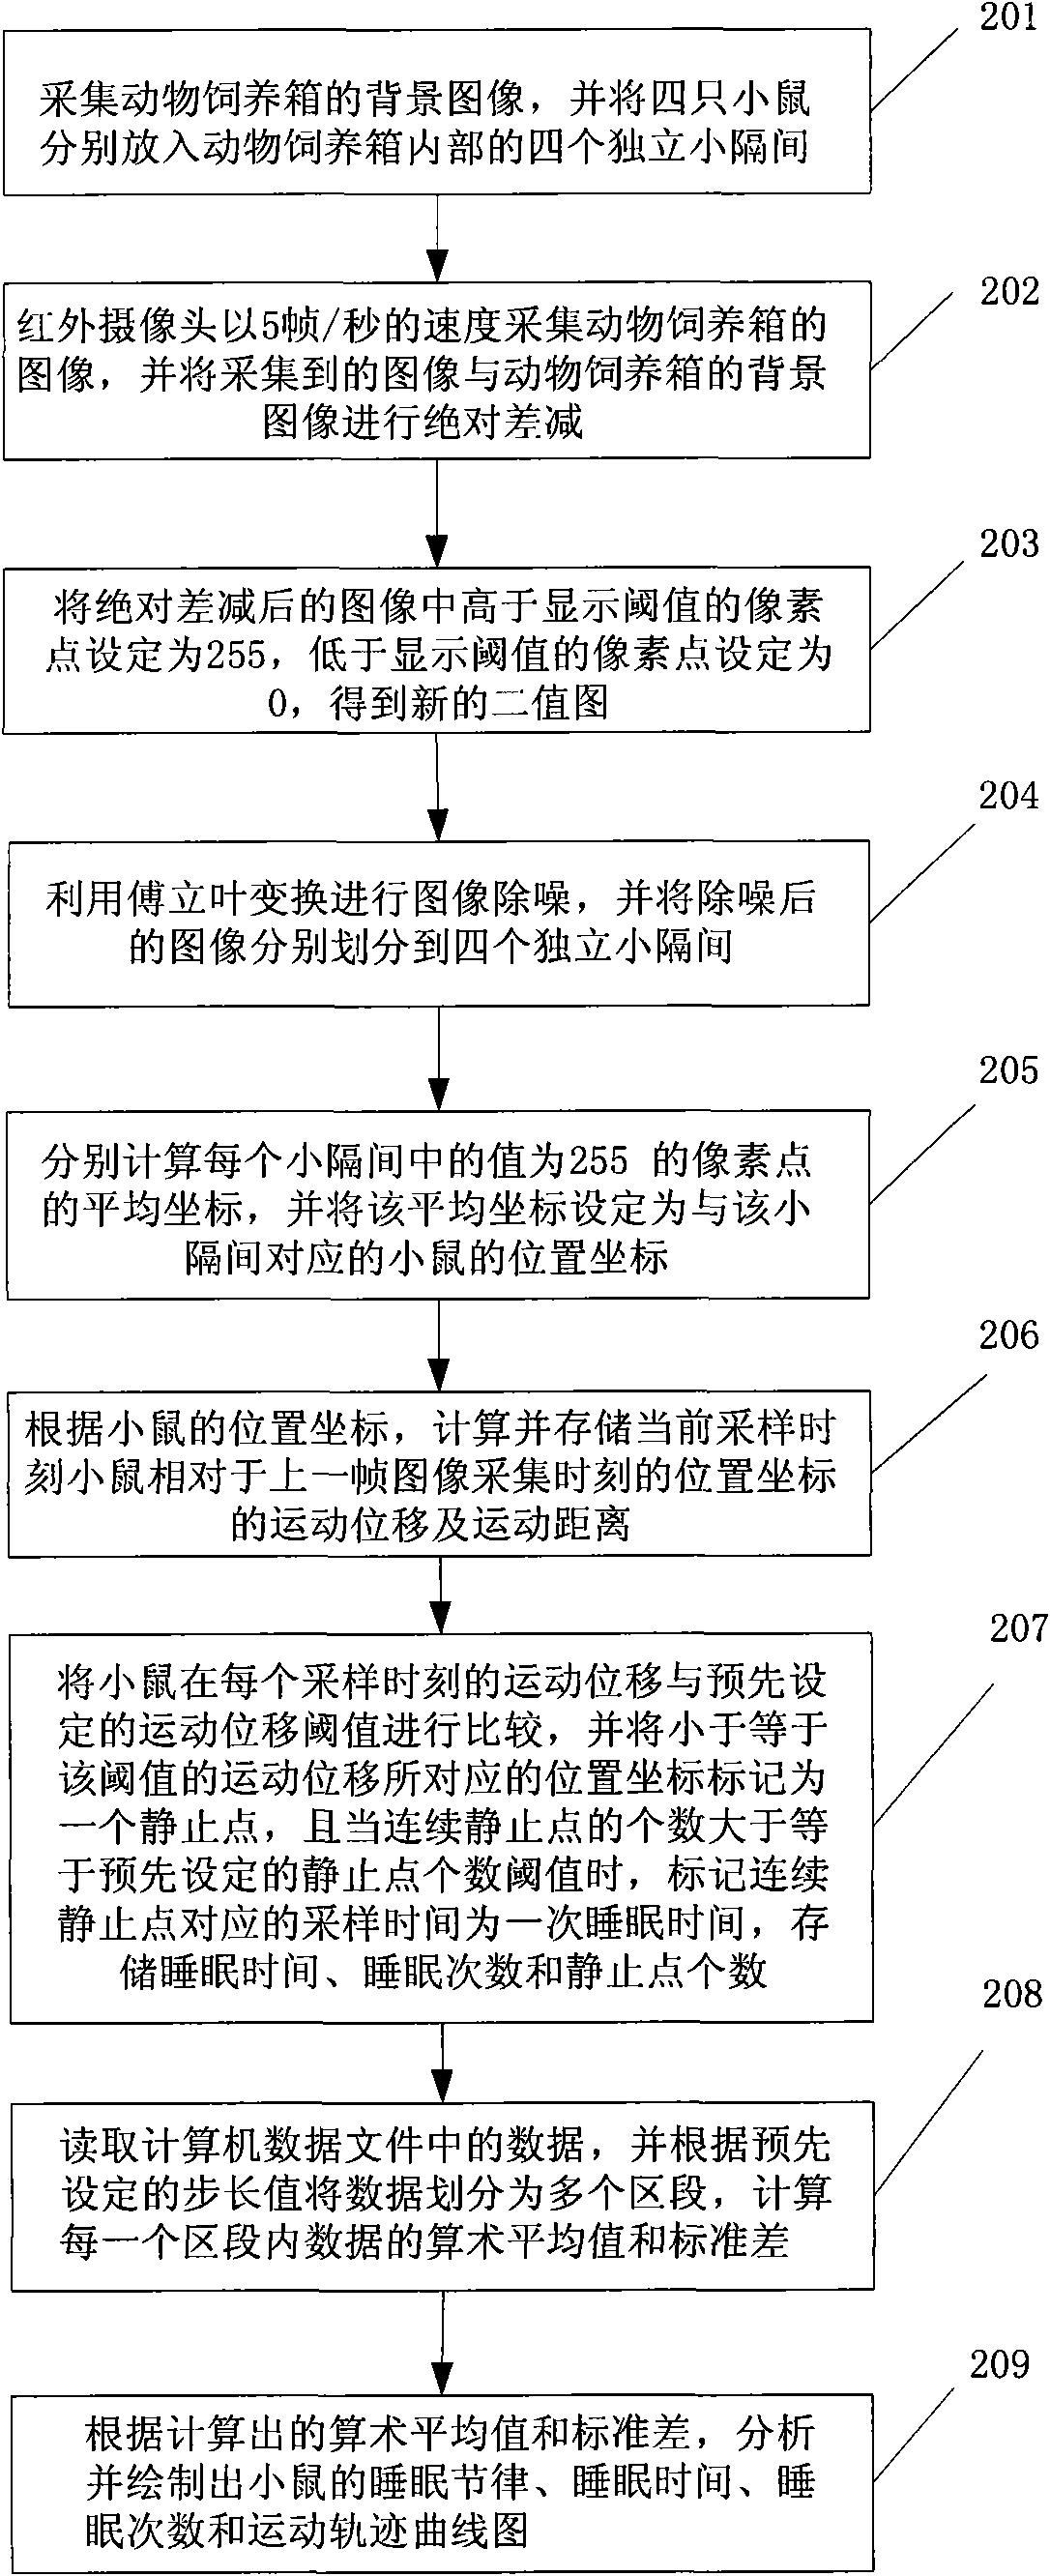 Method and systems for monitoring daily activities of animal